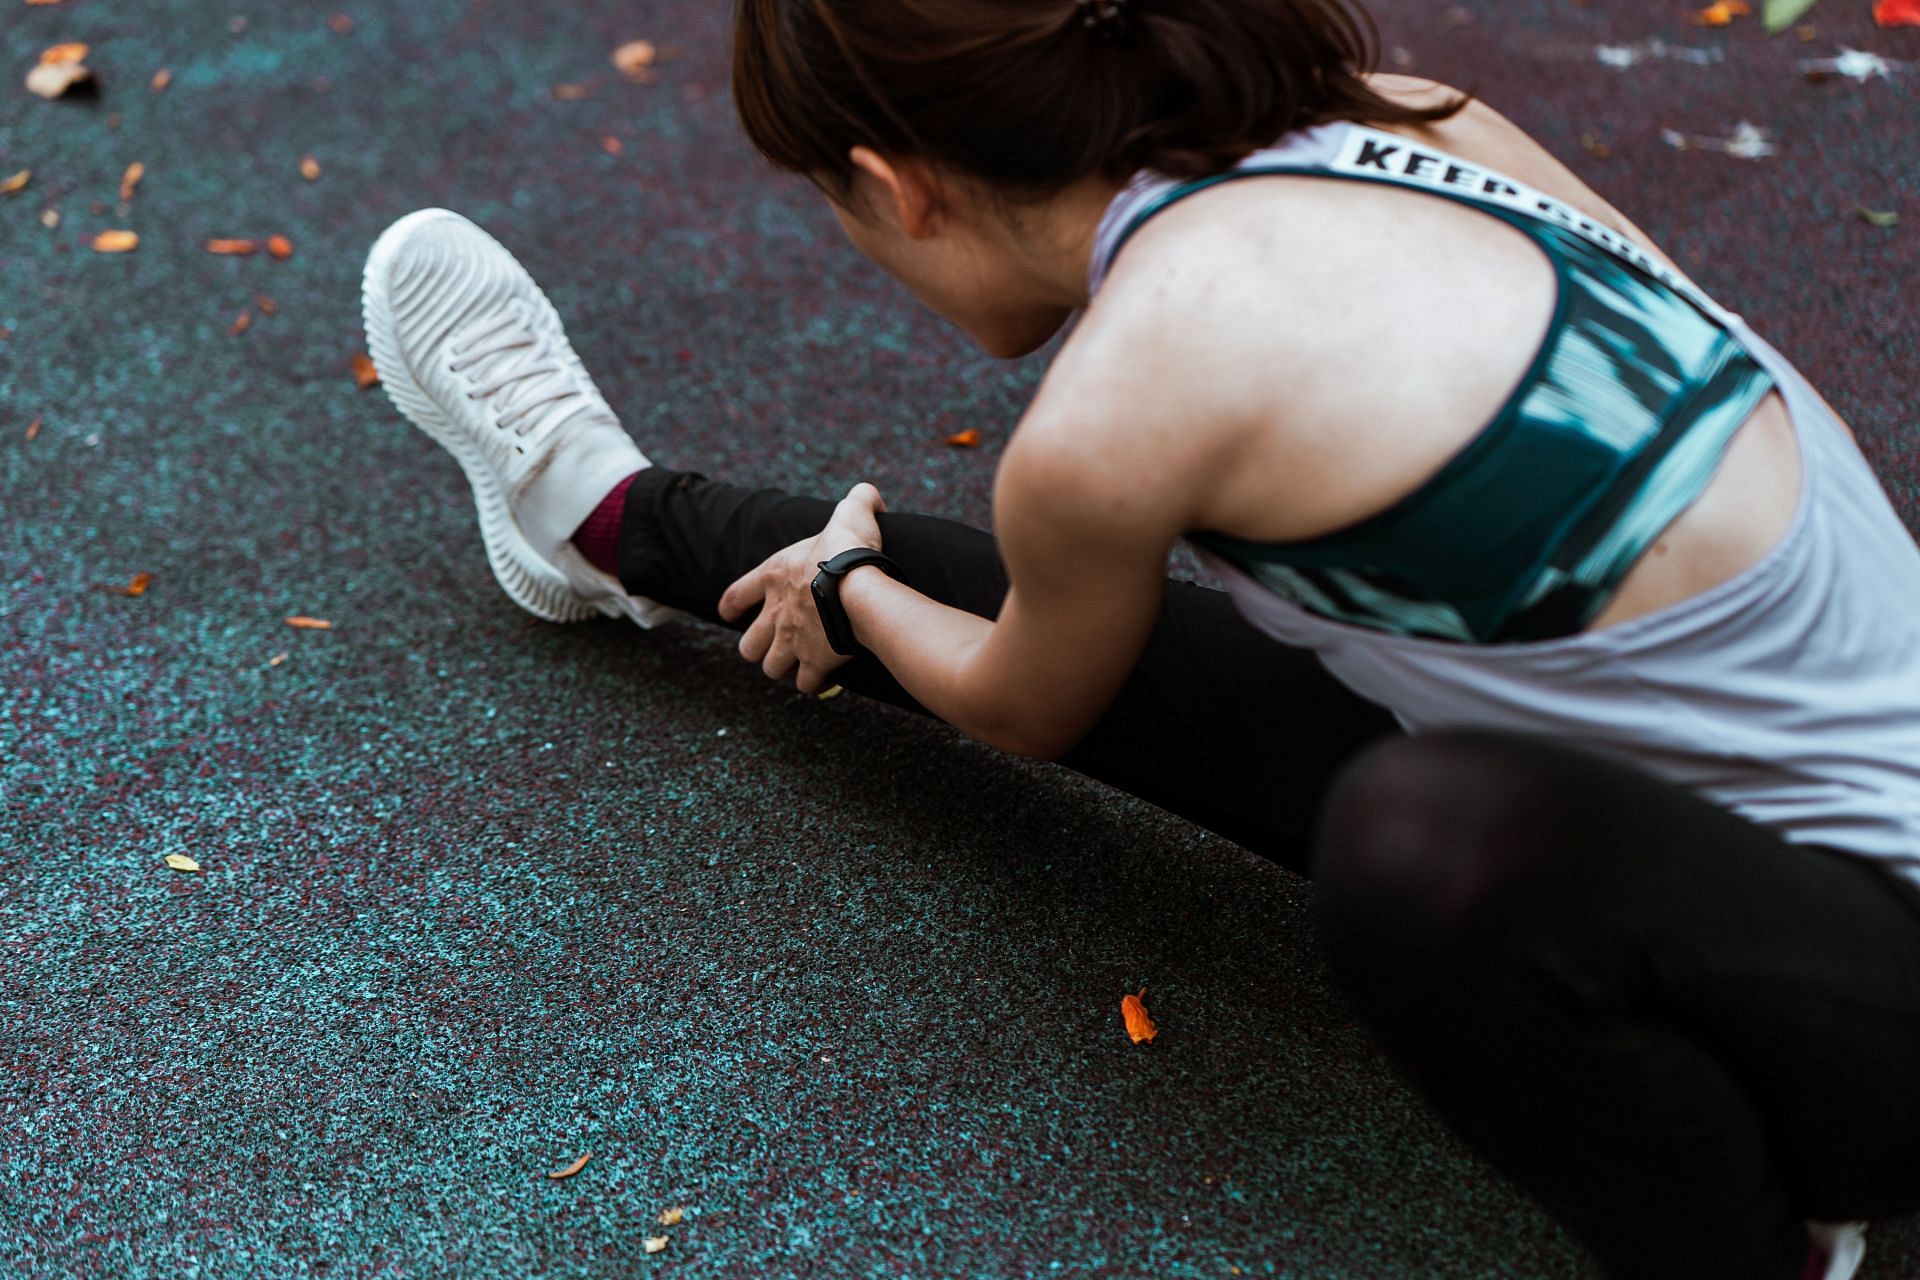 Stretching your anterior tibialis muscles helps with the tight shin. (Image via Pexels / Ketut Subiyanto)